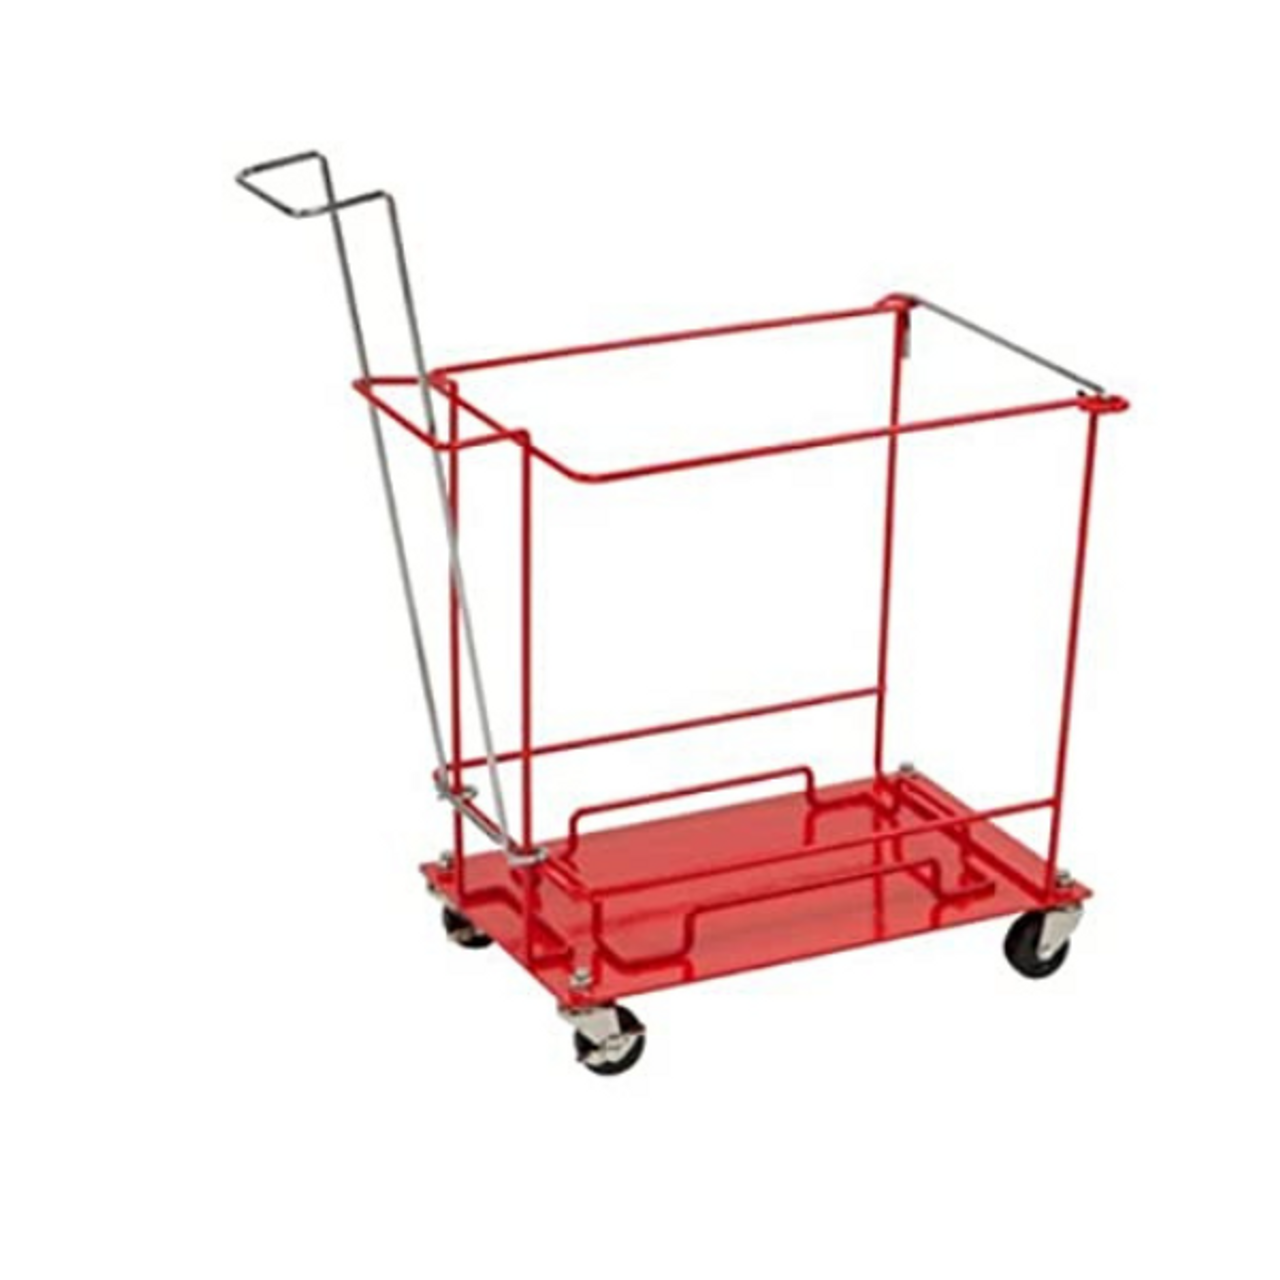 Bright Red Bin with Attached Lid and Foot Operated Pedal For Laboratory  Biohazard Bags